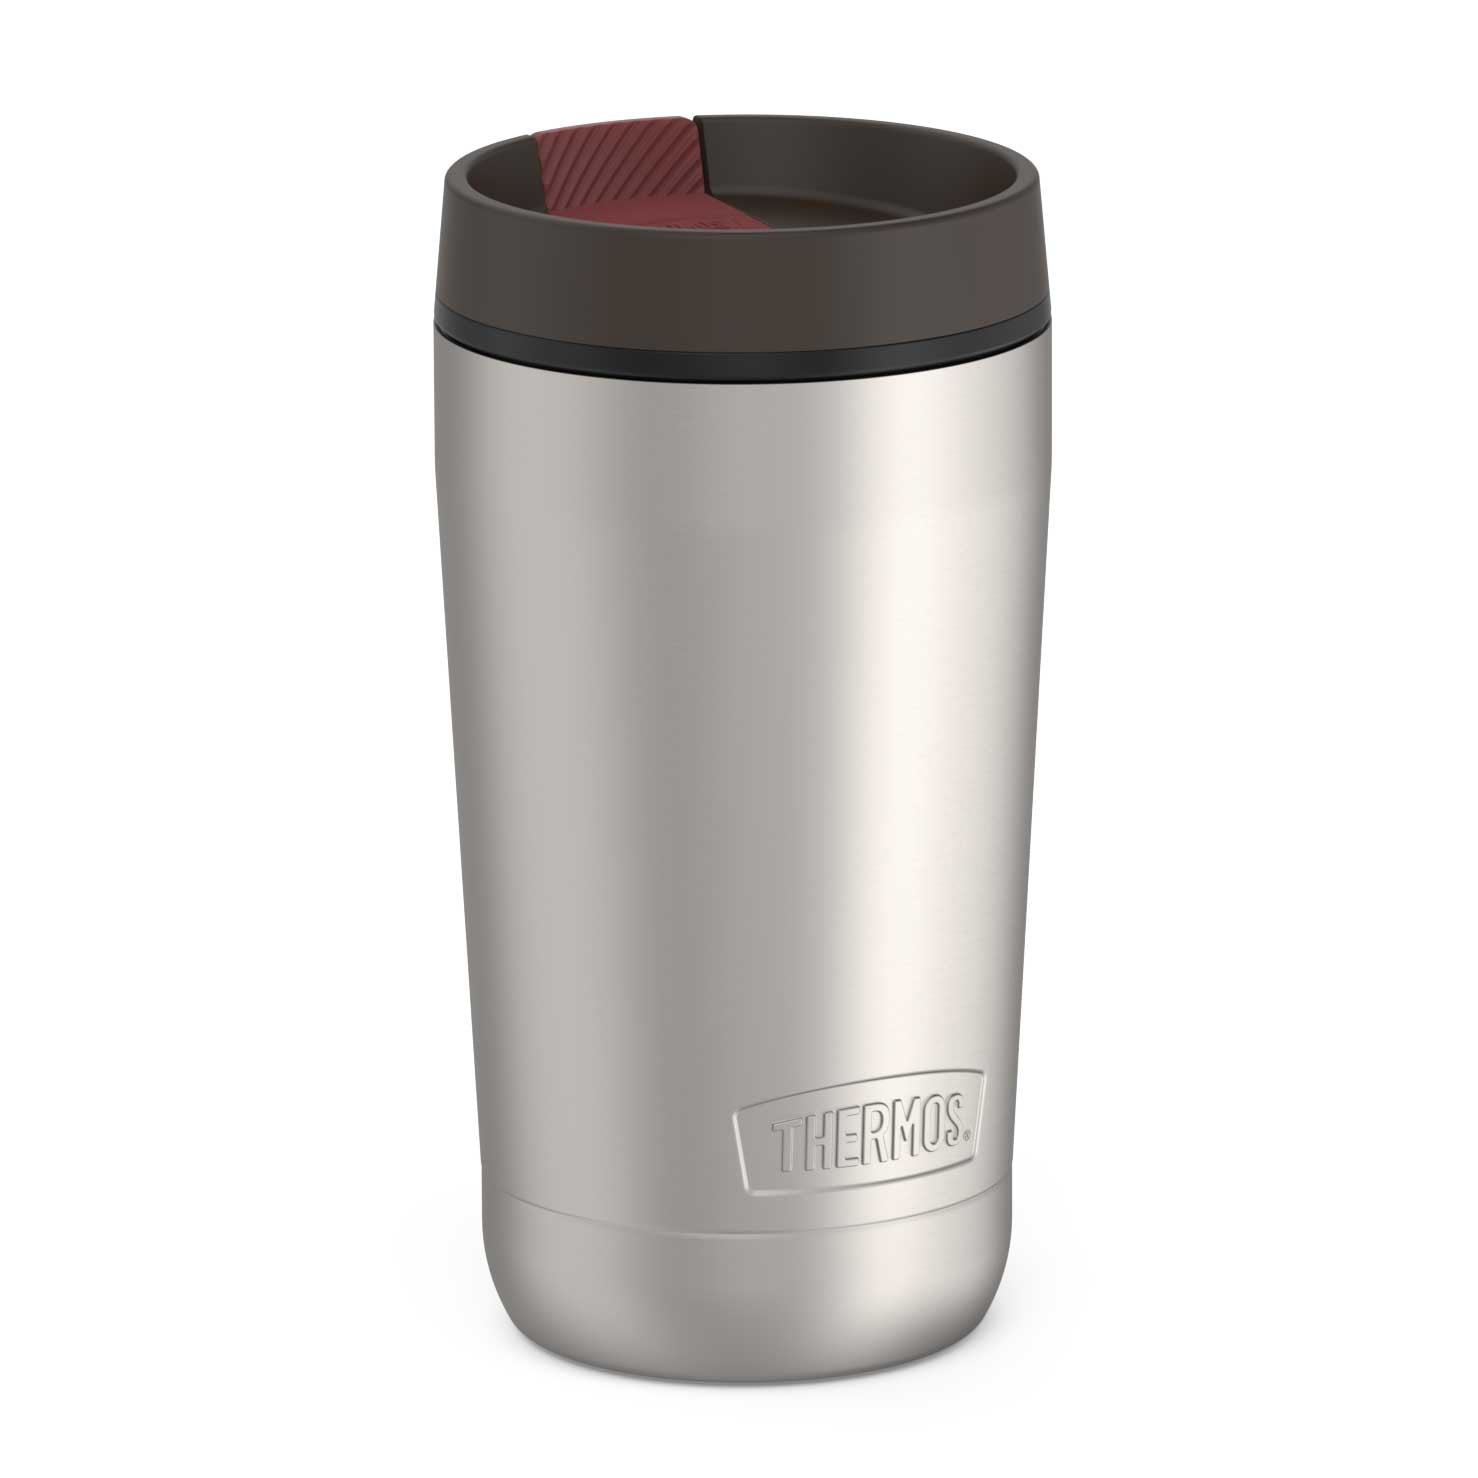 Thermos Stainless Steel 12 oz Beverage Can Insulator Keeps Cold 3 Hours,  New